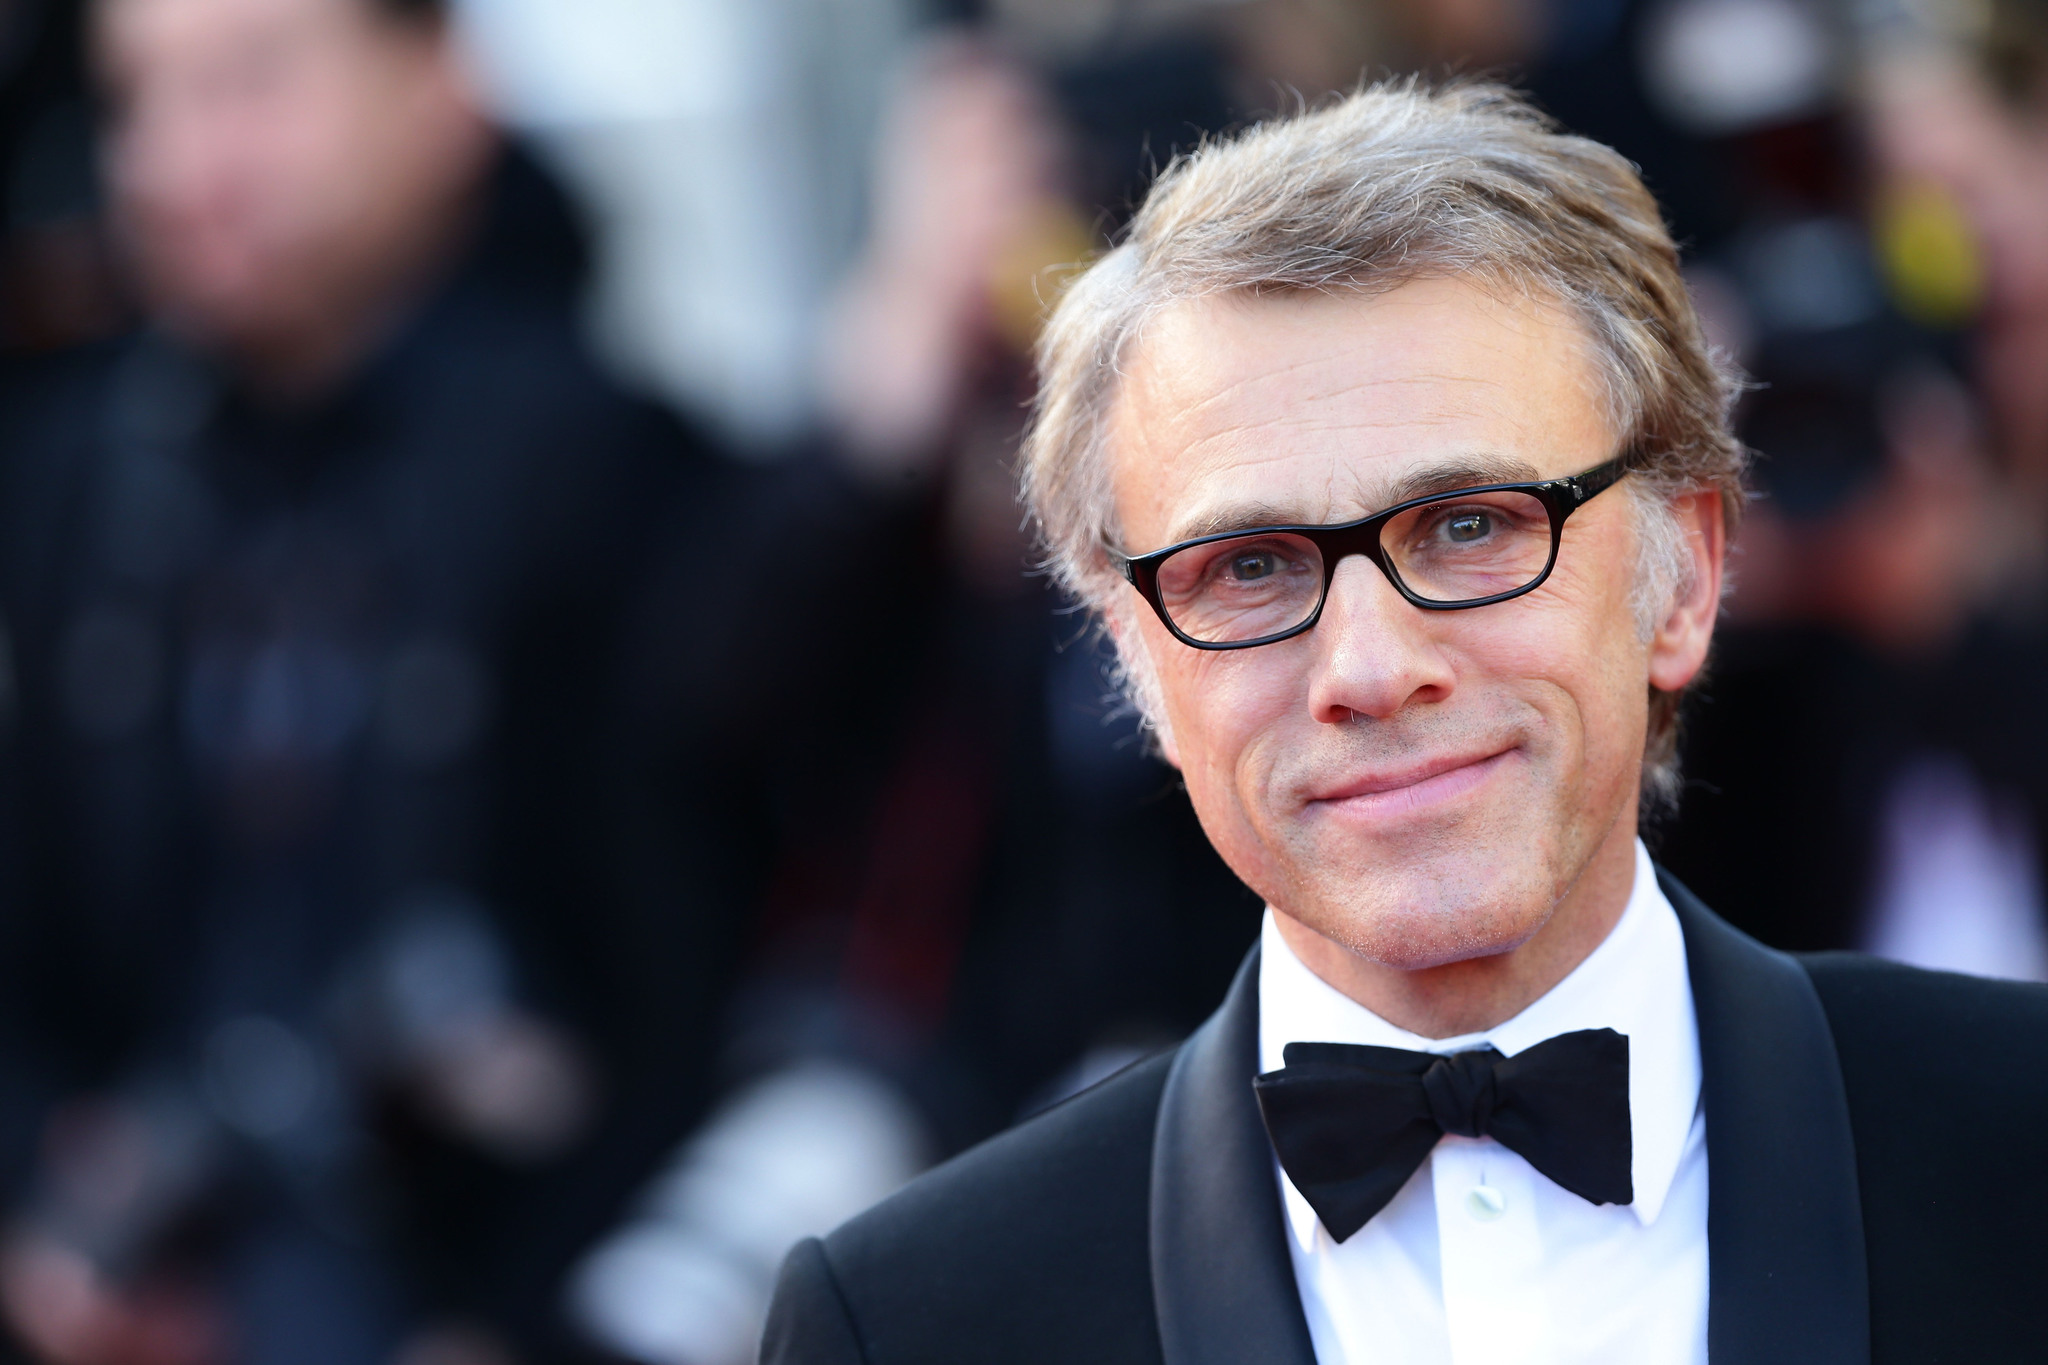 Christoph Waltz at event of Behind the Candelabra (2013)